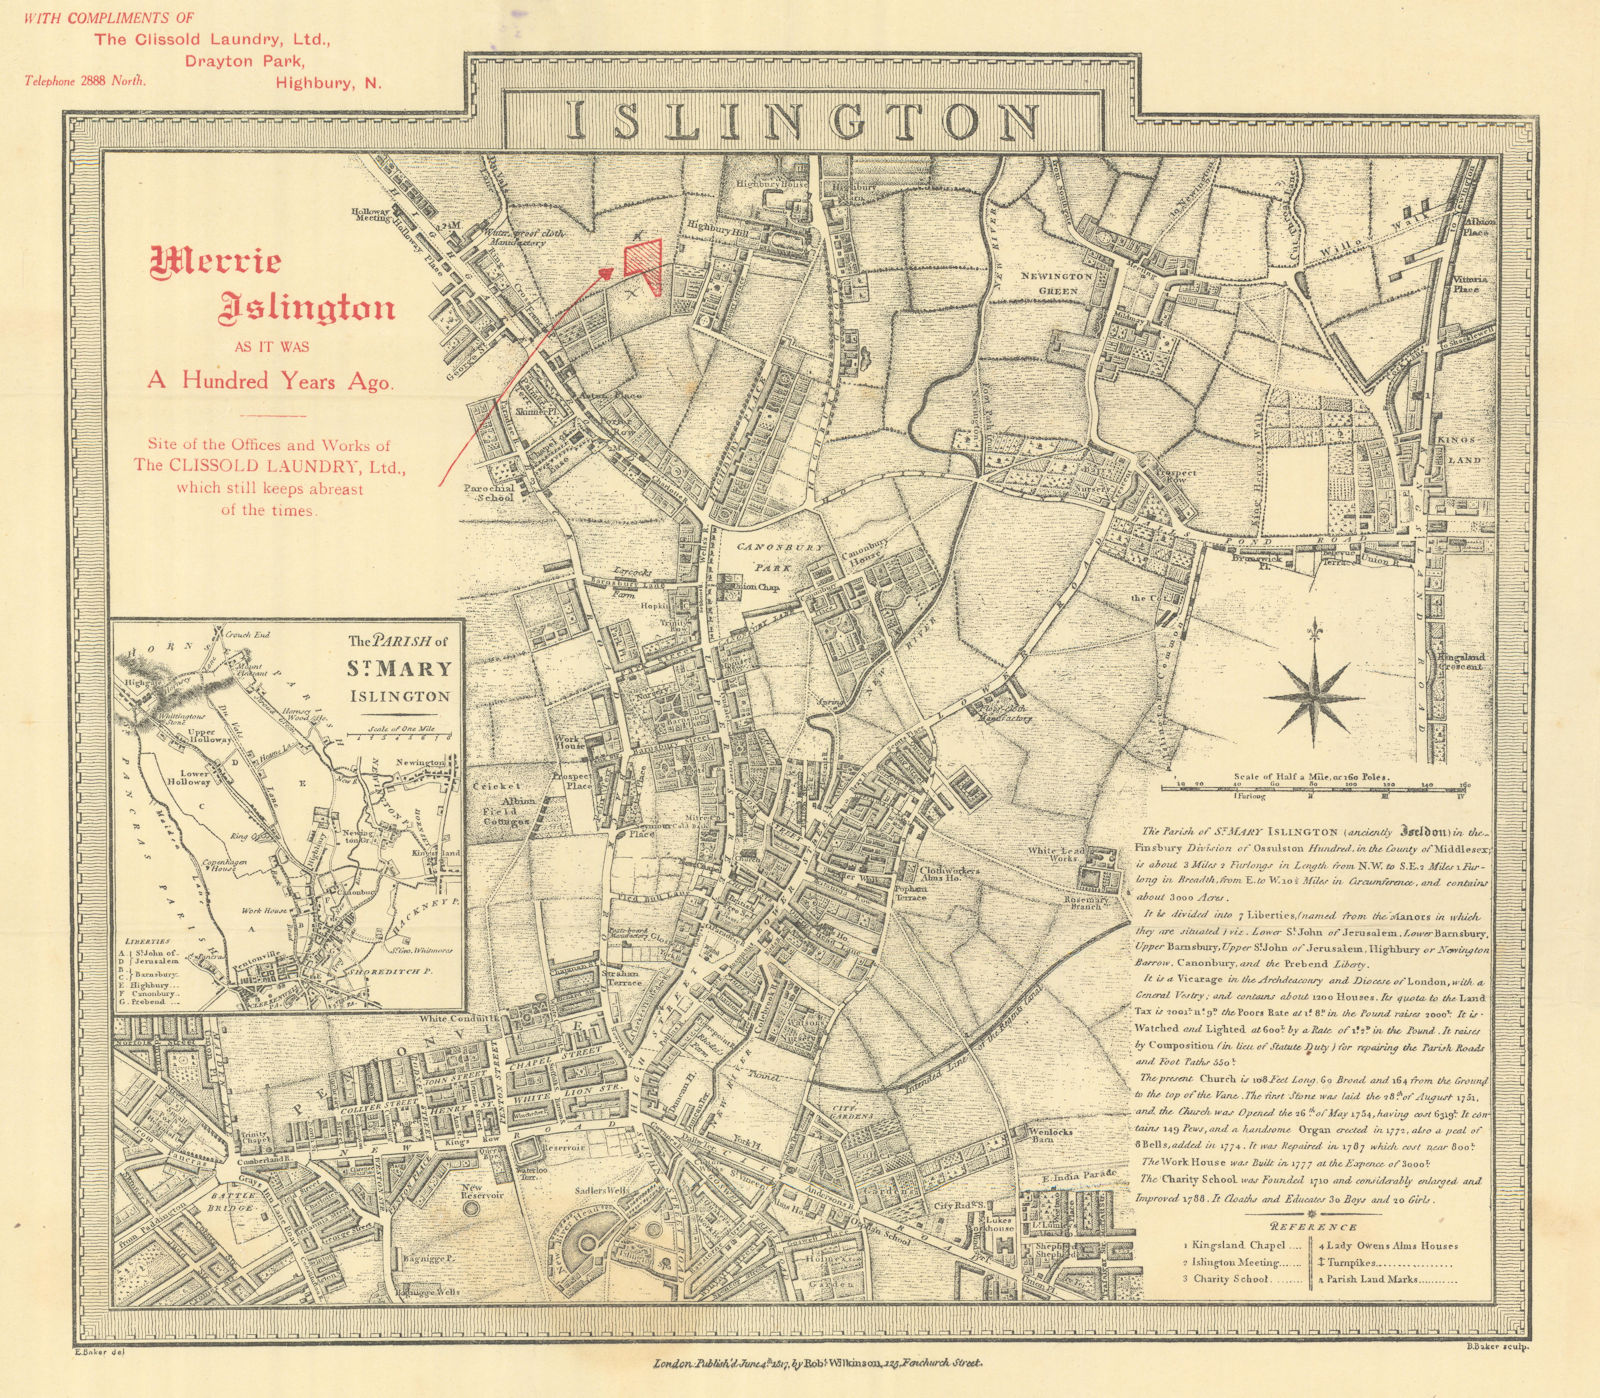 Associate Product Merrie Islington as it was A Hundred Years Ago. BENJAMIN BAKER 1817 (1917) map